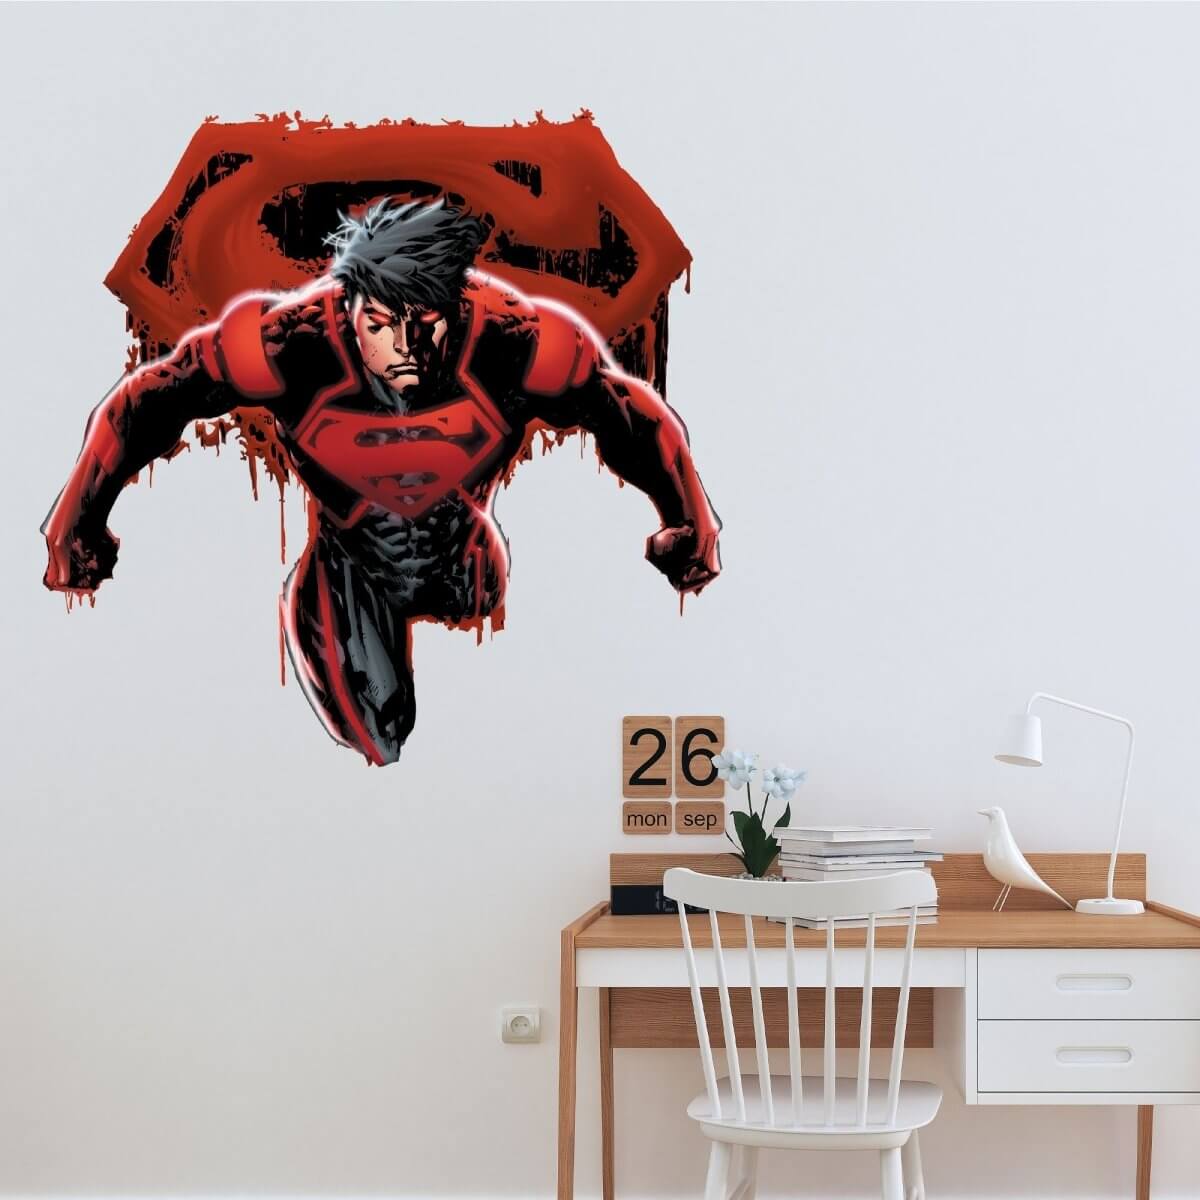 Kismet Decals New 52 Superboy #20 Comic Cover Series Licensed Wall Sticker - Easy DIY Home & Room Decor Wall Art - Kismet Decals